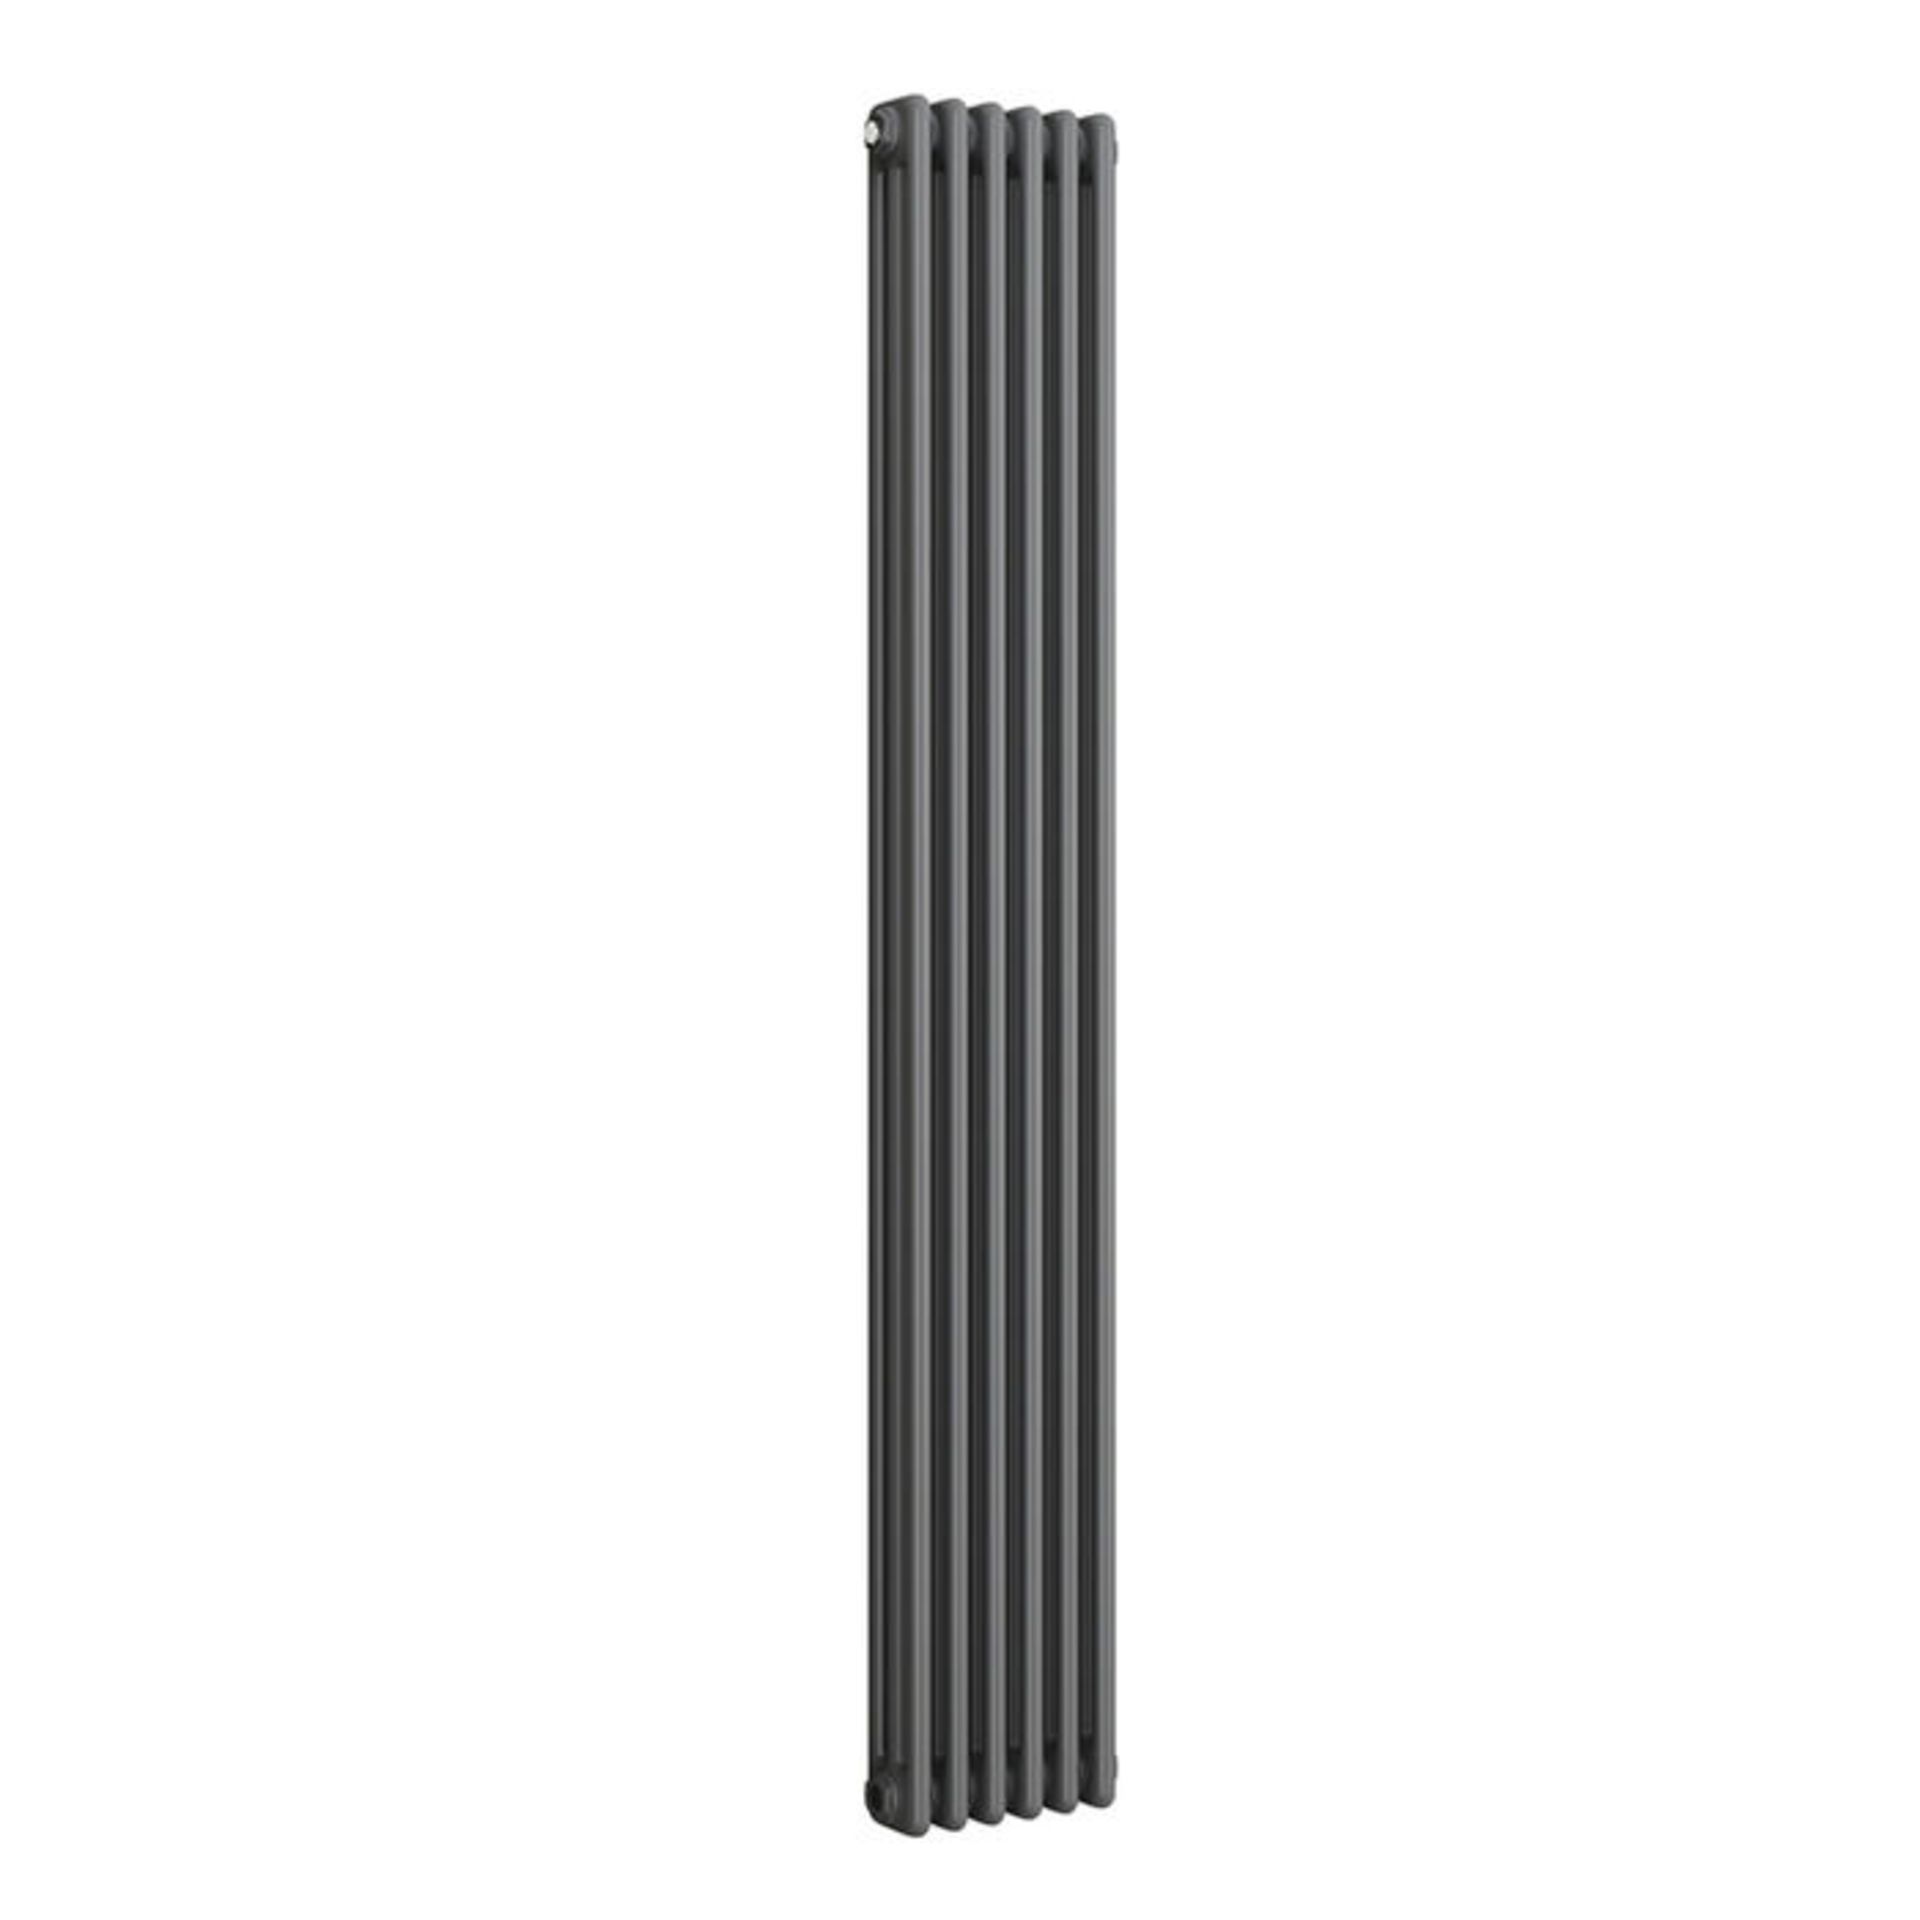 (GR10) 1800x290mm Anthracite Triple Panel Vertical Colosseum Traditional Radiator RRP £309.99. - Image 5 of 5